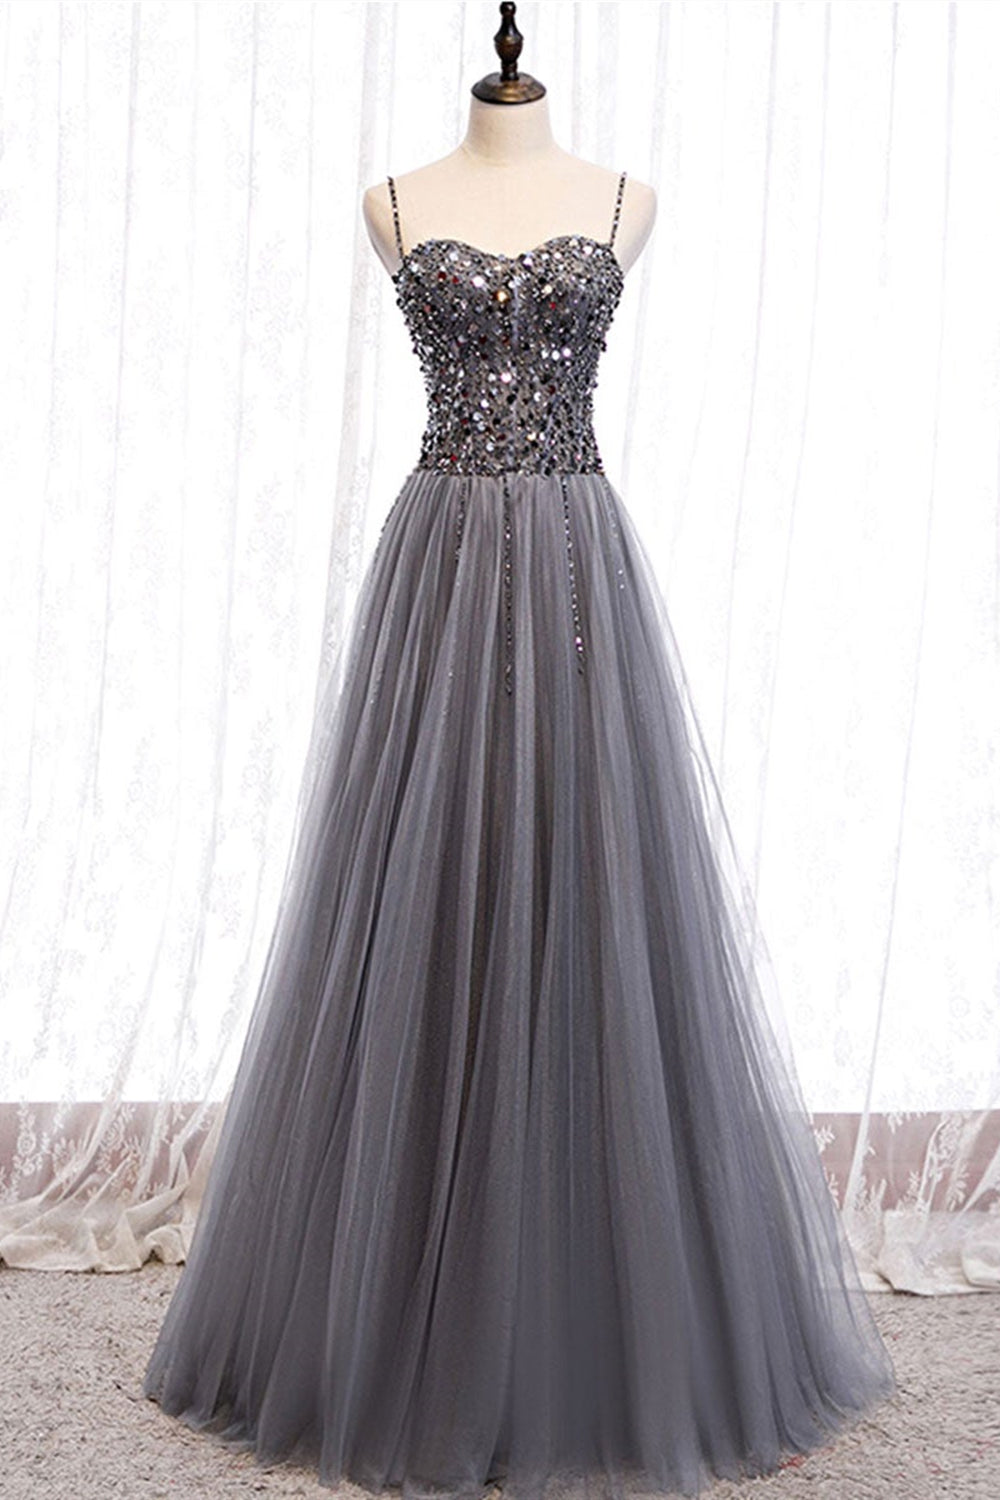 Sweetheart Neck Shiny Sequins Gray Long Prom Dresses, Gray Sequins Formal Dresses, Sparkly Grey Evening Dresses